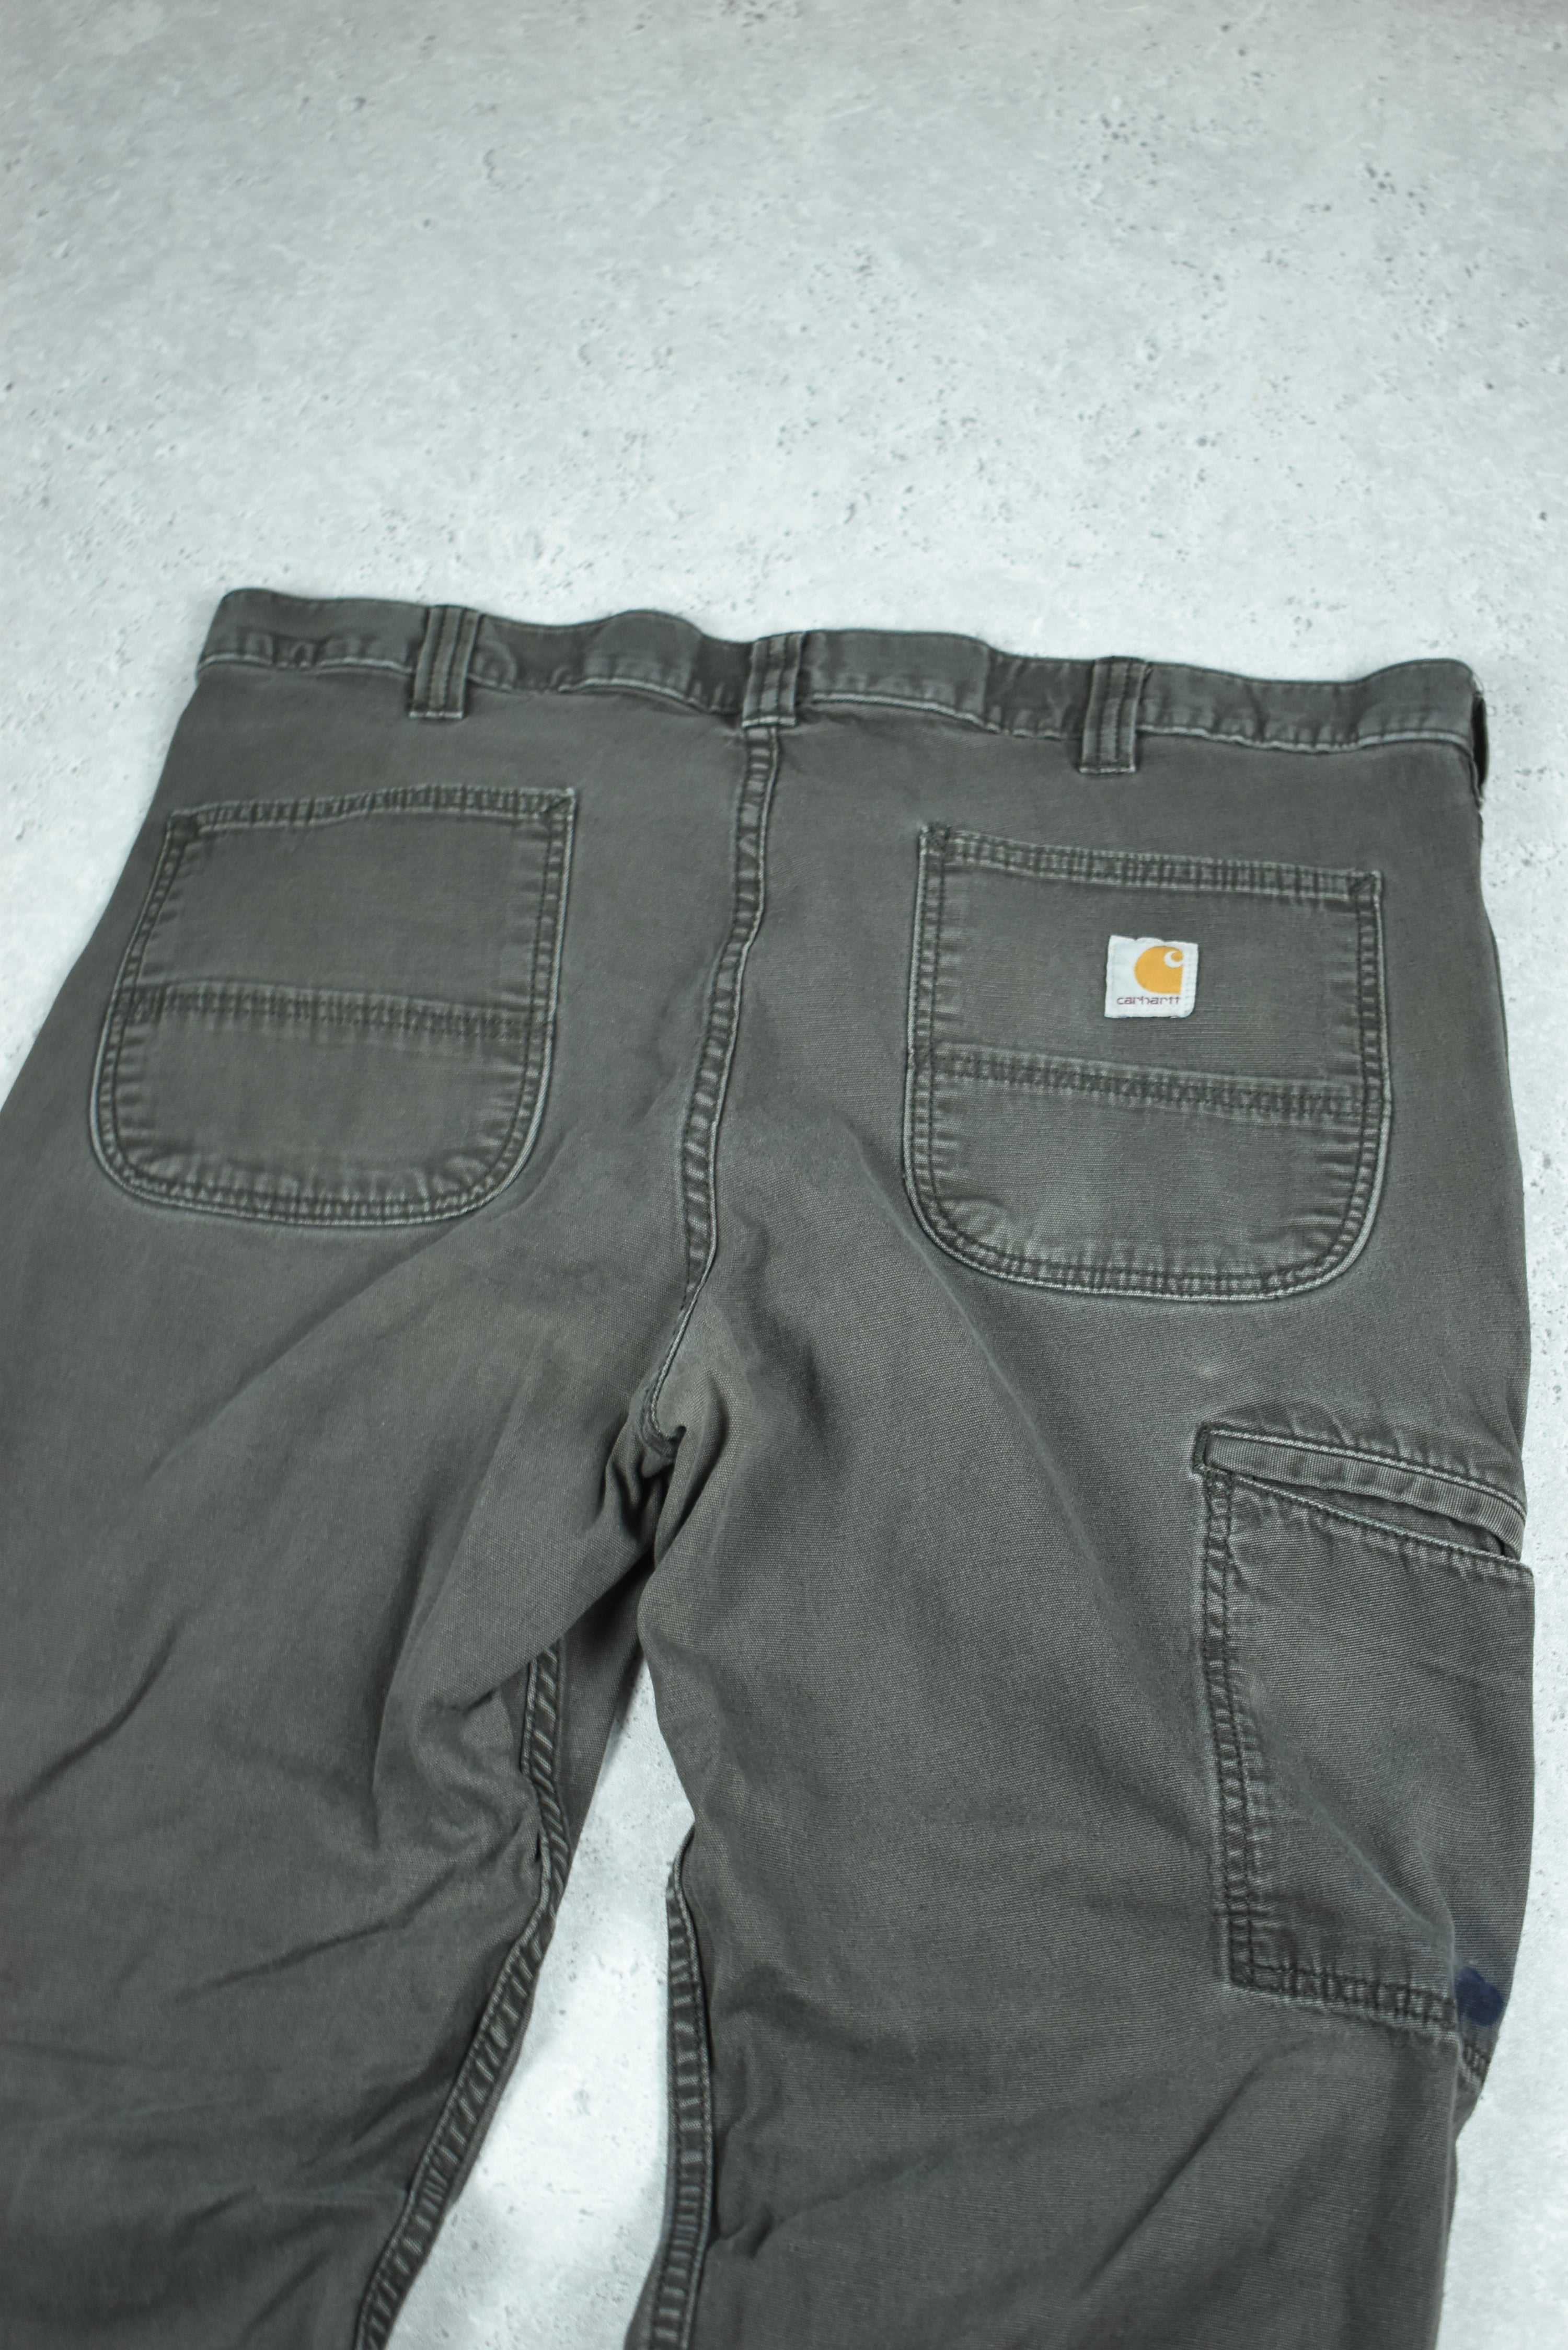 Vintage Carhartt Relaxed Fit Workwear Pants 38x30